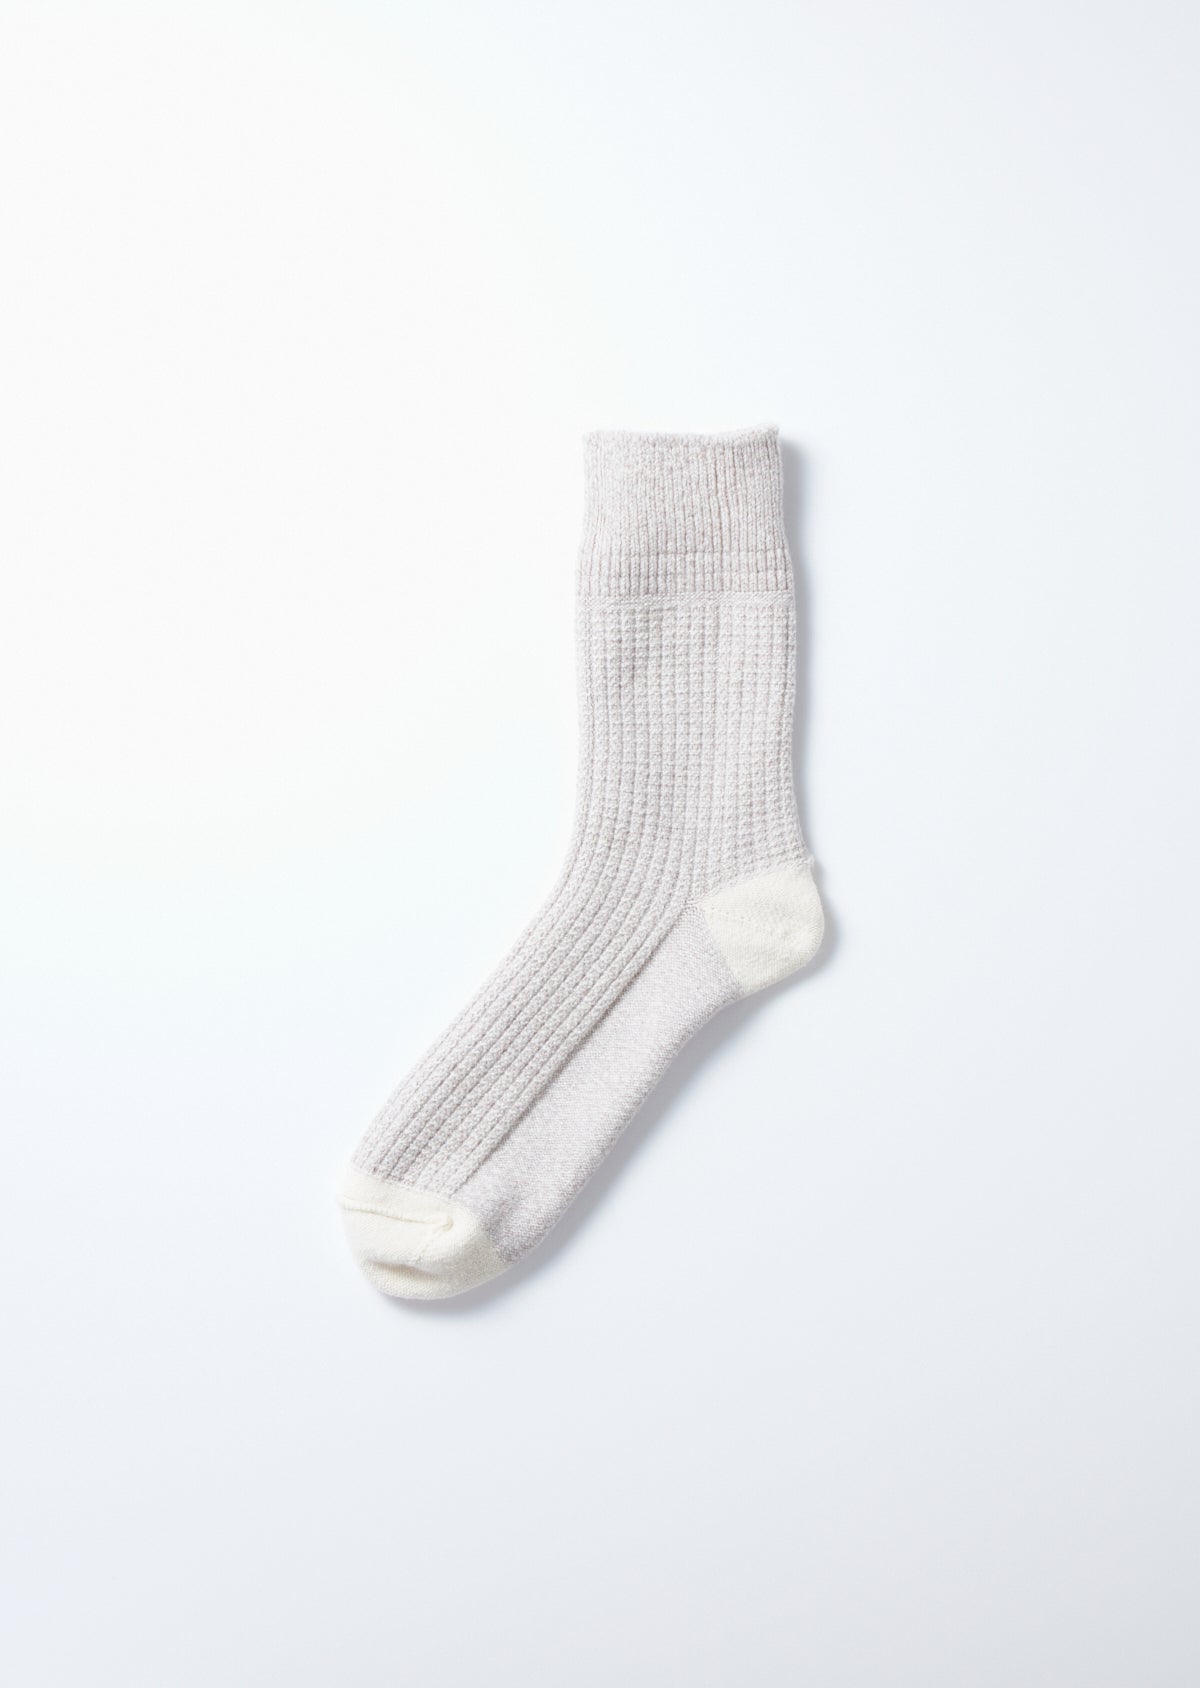 RoToTo RECYCLE COTTON / WOOL DAILY 3 PACK SOCKS